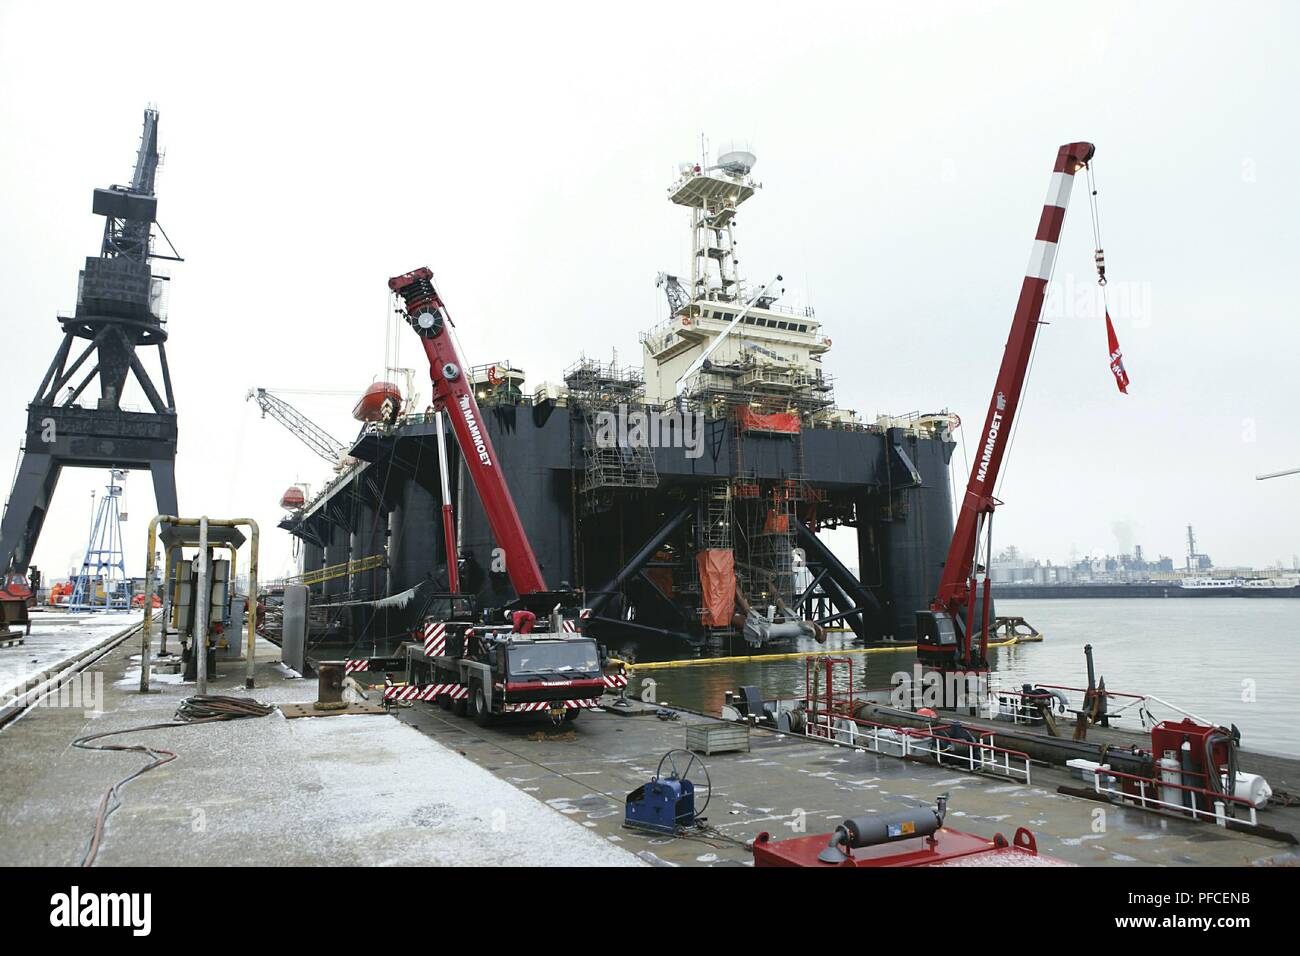 Russia. 21st Aug, 2018. Before pipelaying could start, the Castoro Sei pipelay vessel was retrofitted at the Port of Rotterdam in February 2010. A new welding system and heavy-duty tensioners that hold the pipeline in position were installed, as well as stinger - the external ramp which will provide support to the pipeline when it is slowly released. Credit: Nord Stream Ag/Russian Look/ZUMA Wire/Alamy Live News Stock Photo